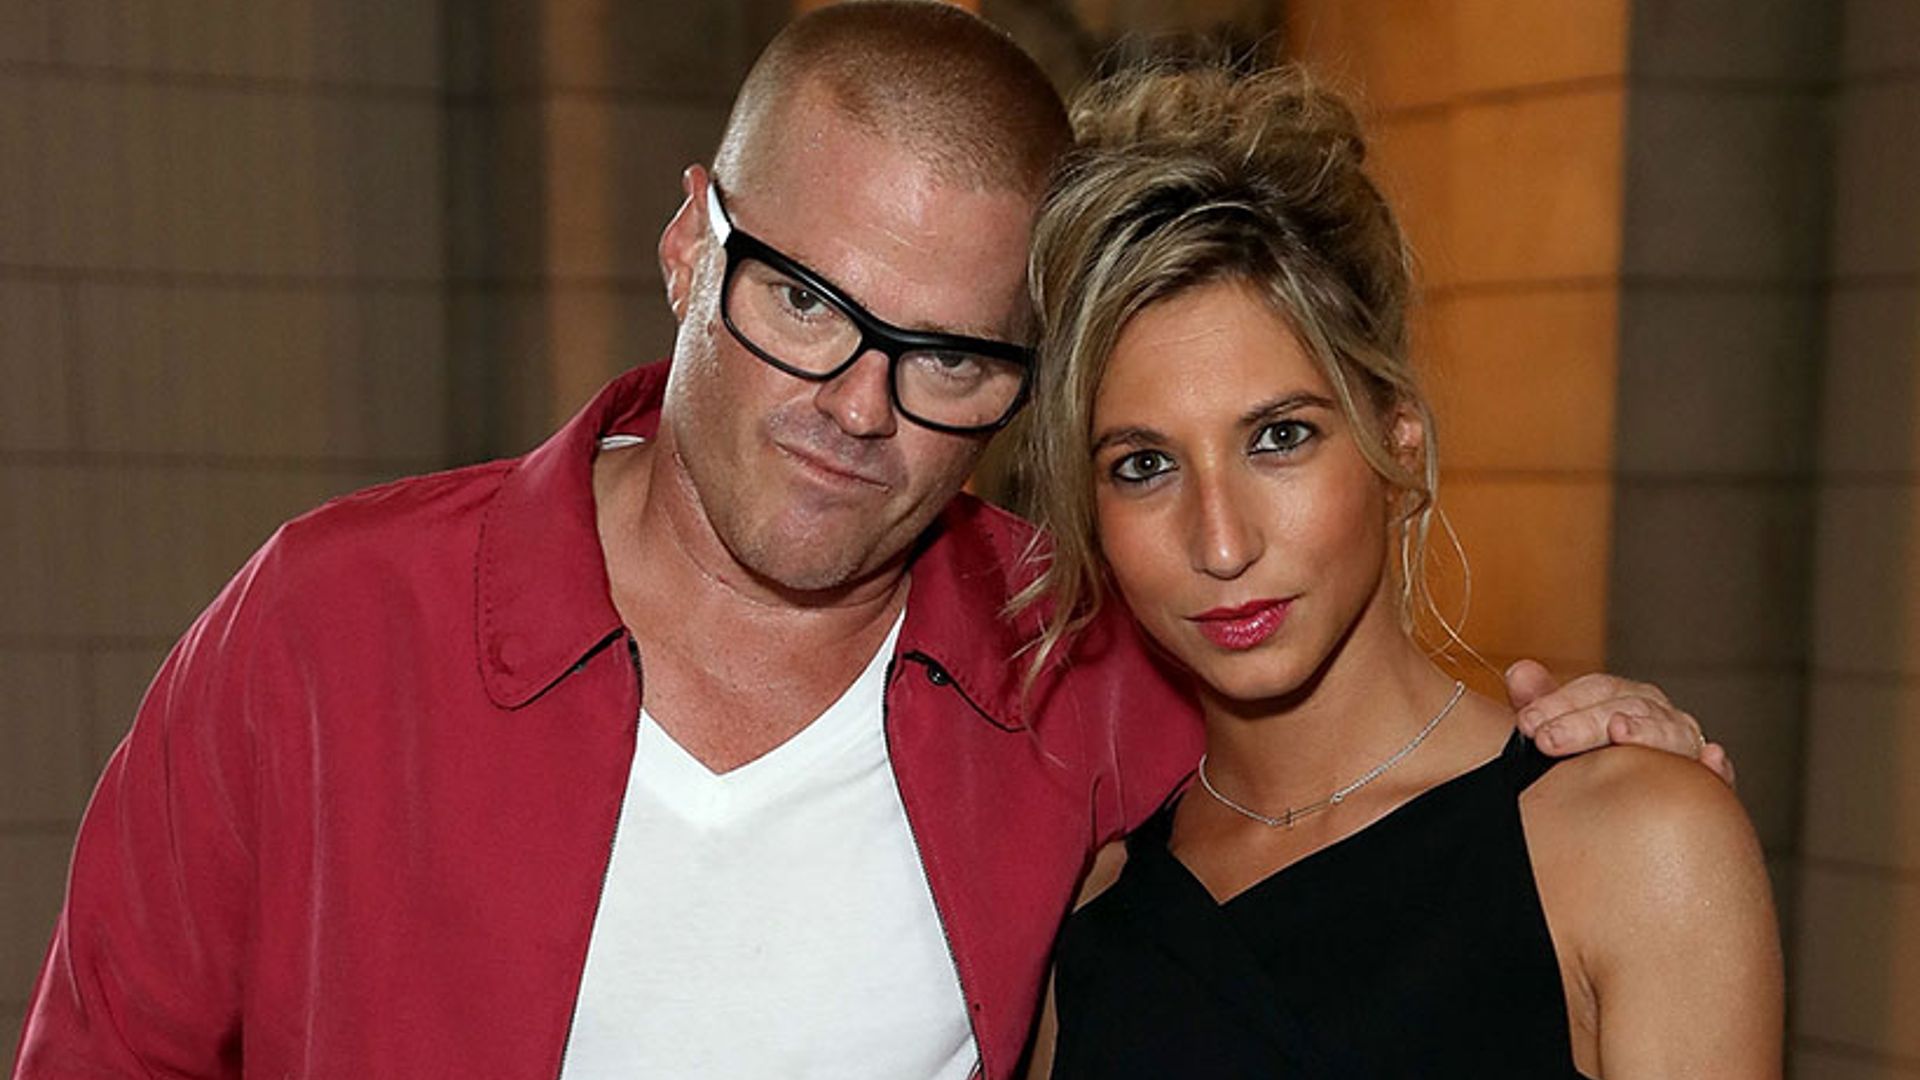 Heston Blumenthal marries girlfriend Stephanie Gouveia three months after welcoming first child together